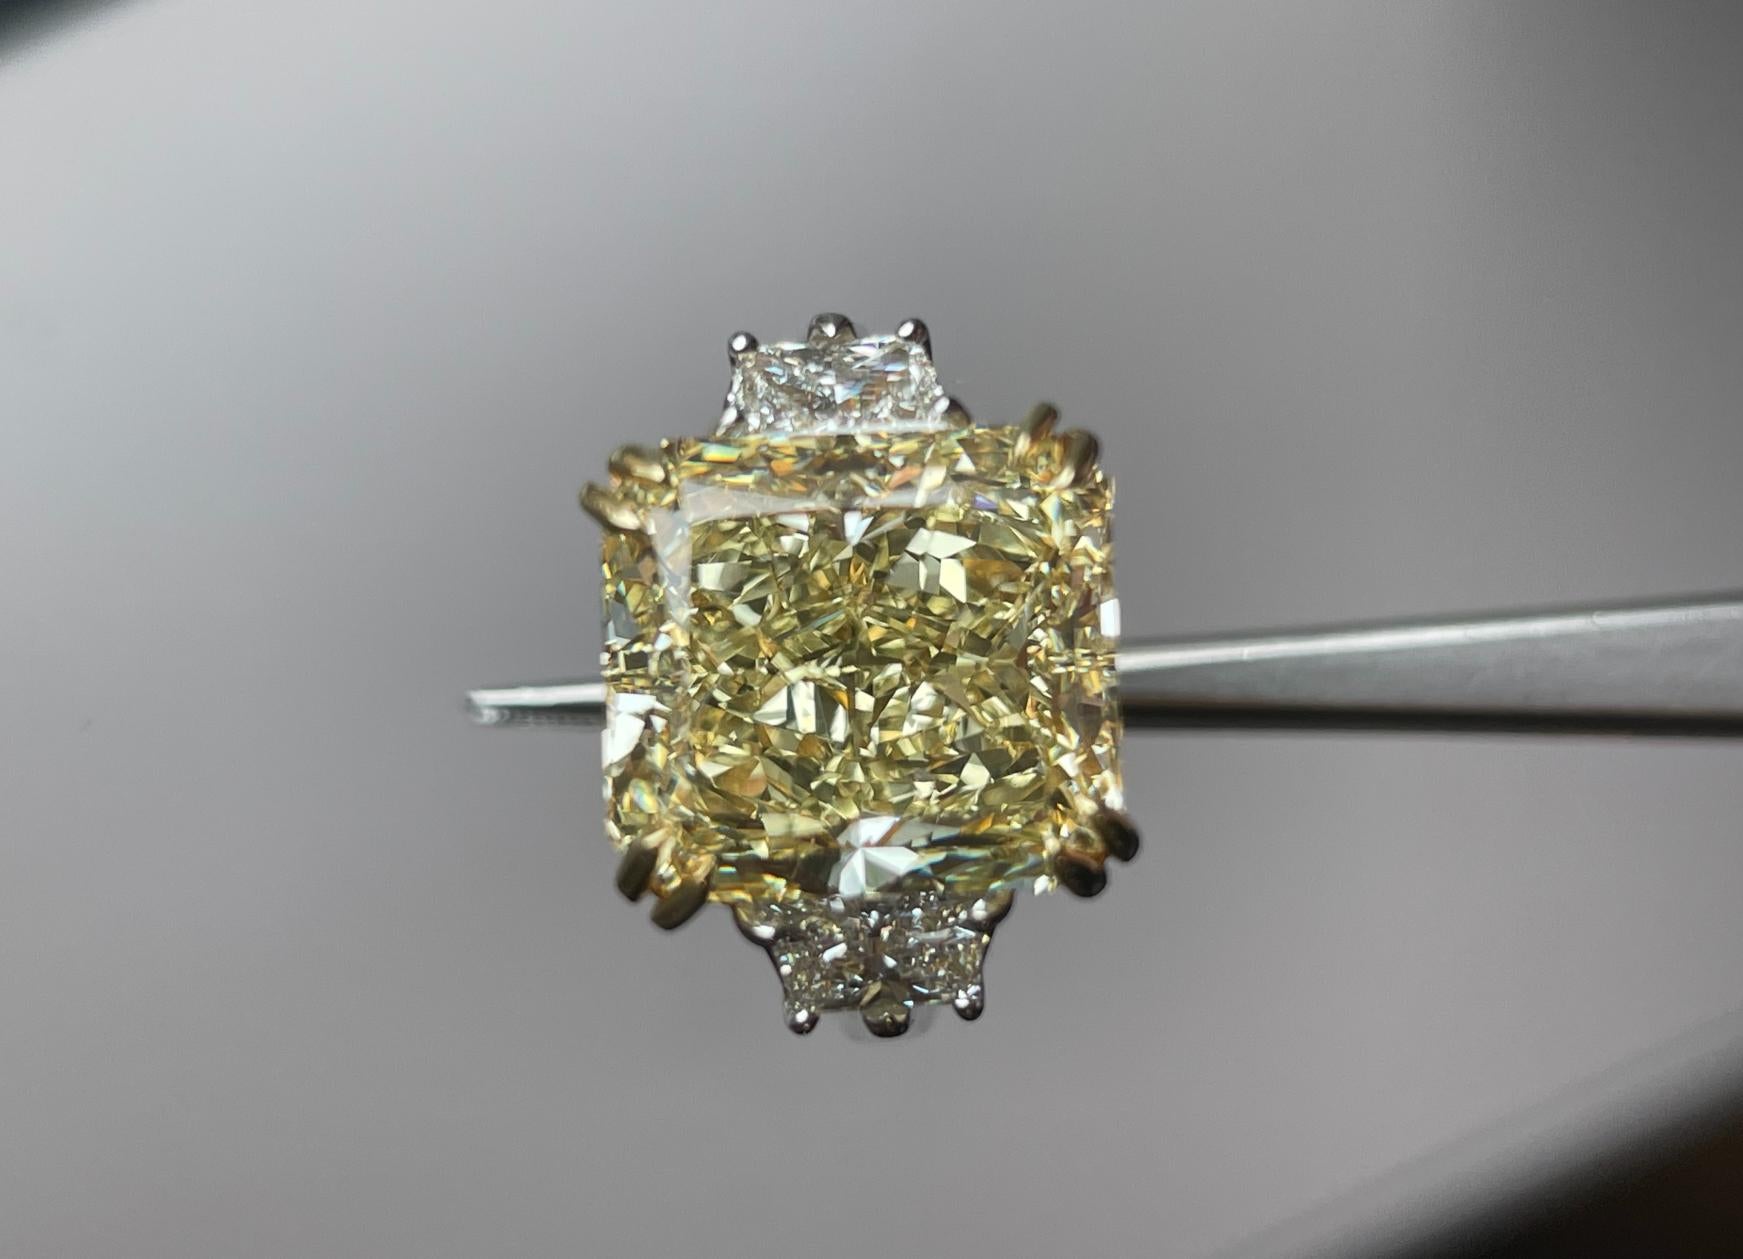 Extraordinary 9.13 Carat Fancy Yellow Radiant Cut Engagement Ring 

Setting:
Platinum / 18KY 

Center Stone: GIA Certified Fancy Yellow
Carat Weight: 9.13
Clarity: VS2

Side Stones: Trapezoid Diamonds 
Color: F-G
Clarity: VS
Cut: Excellent
The total